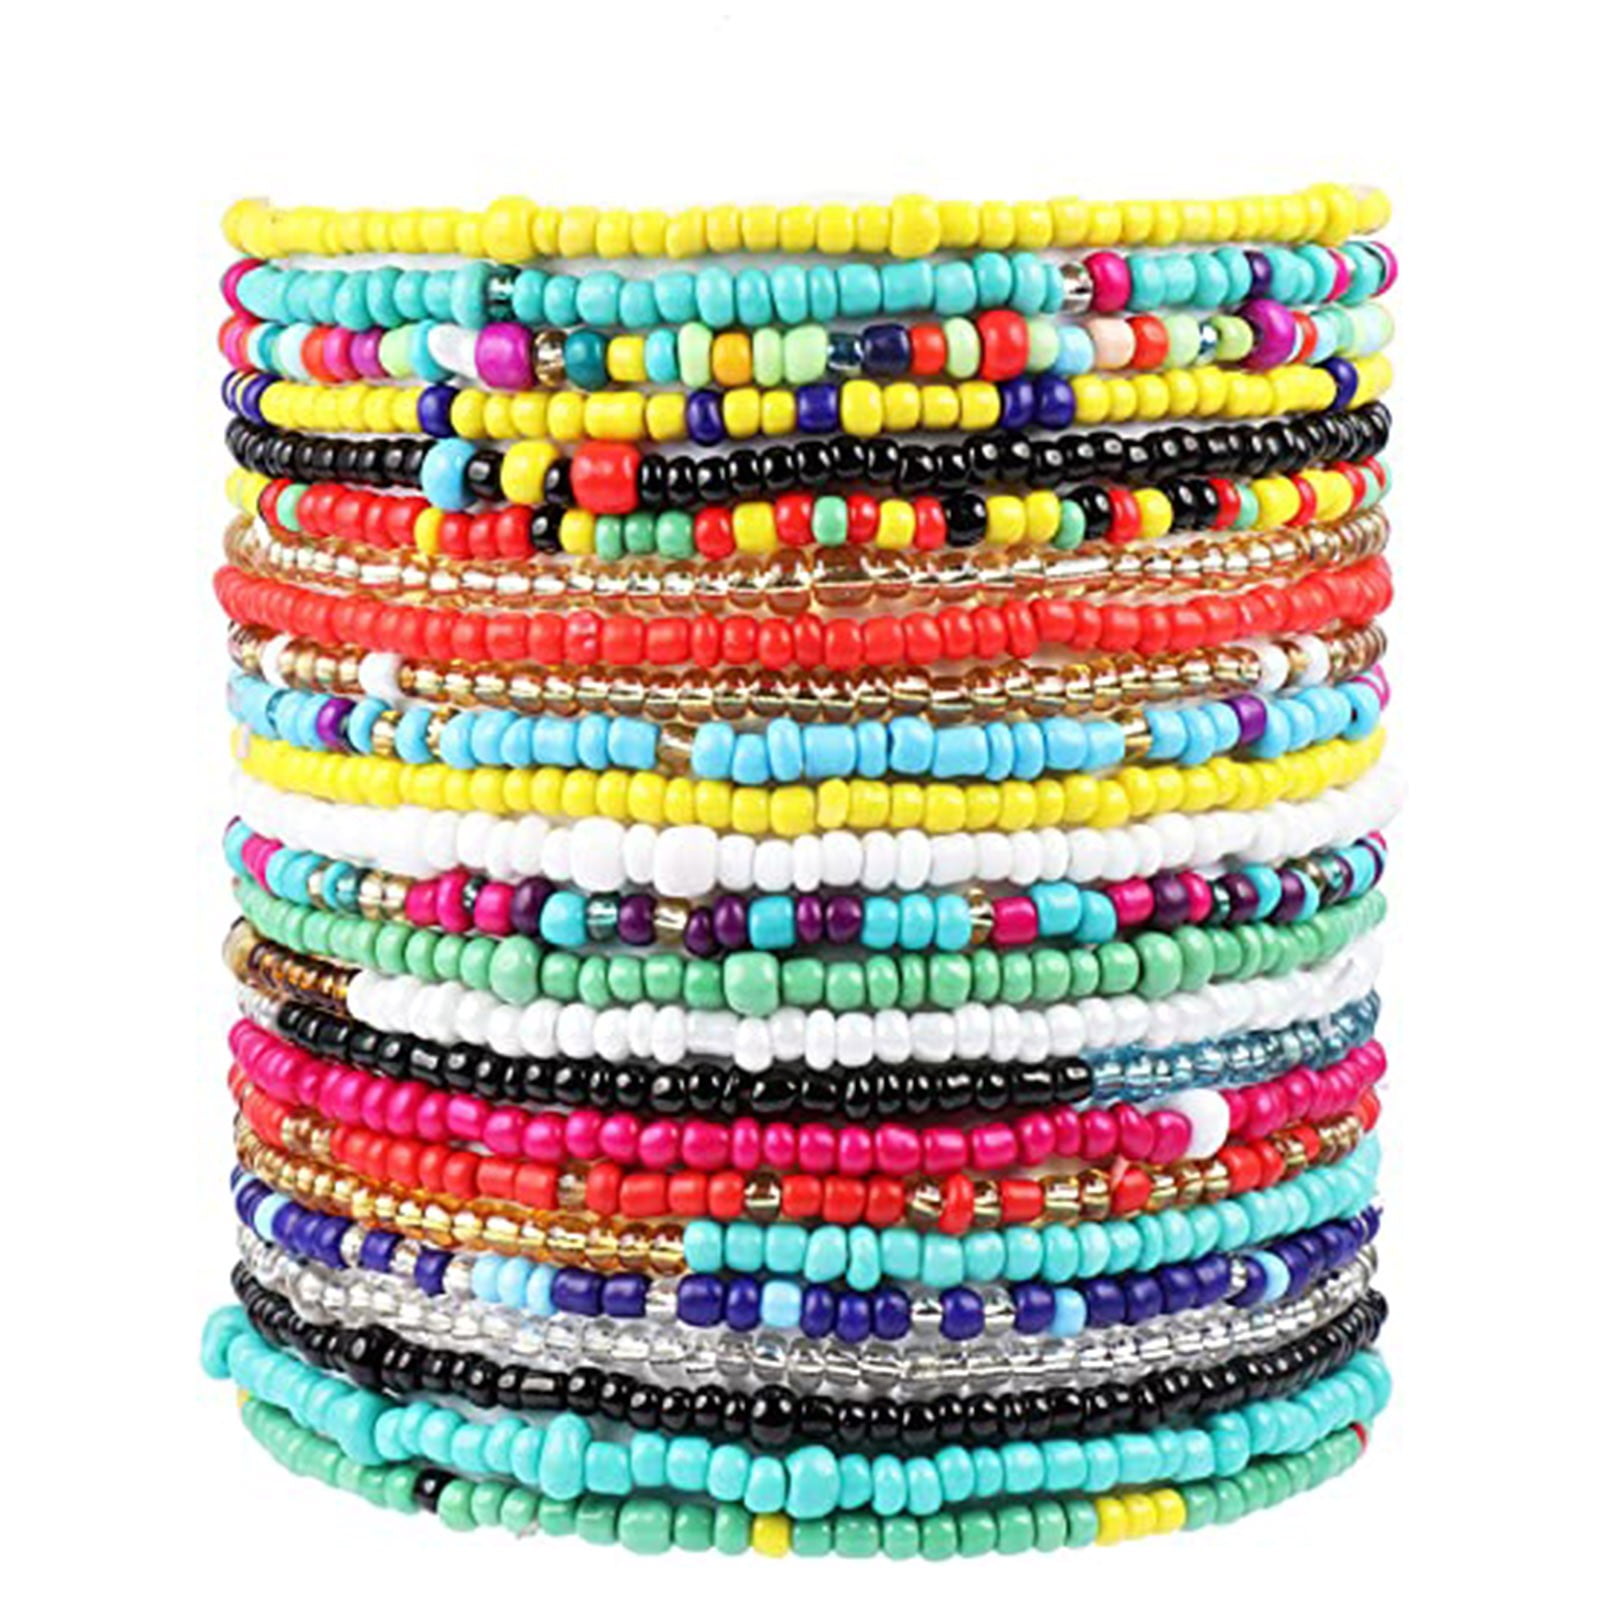 Garden Charms 3 Colors Stainless Steel Bangle Jewelry Seed Beads Handmade Cuff Bangles Woven Boho Bangles